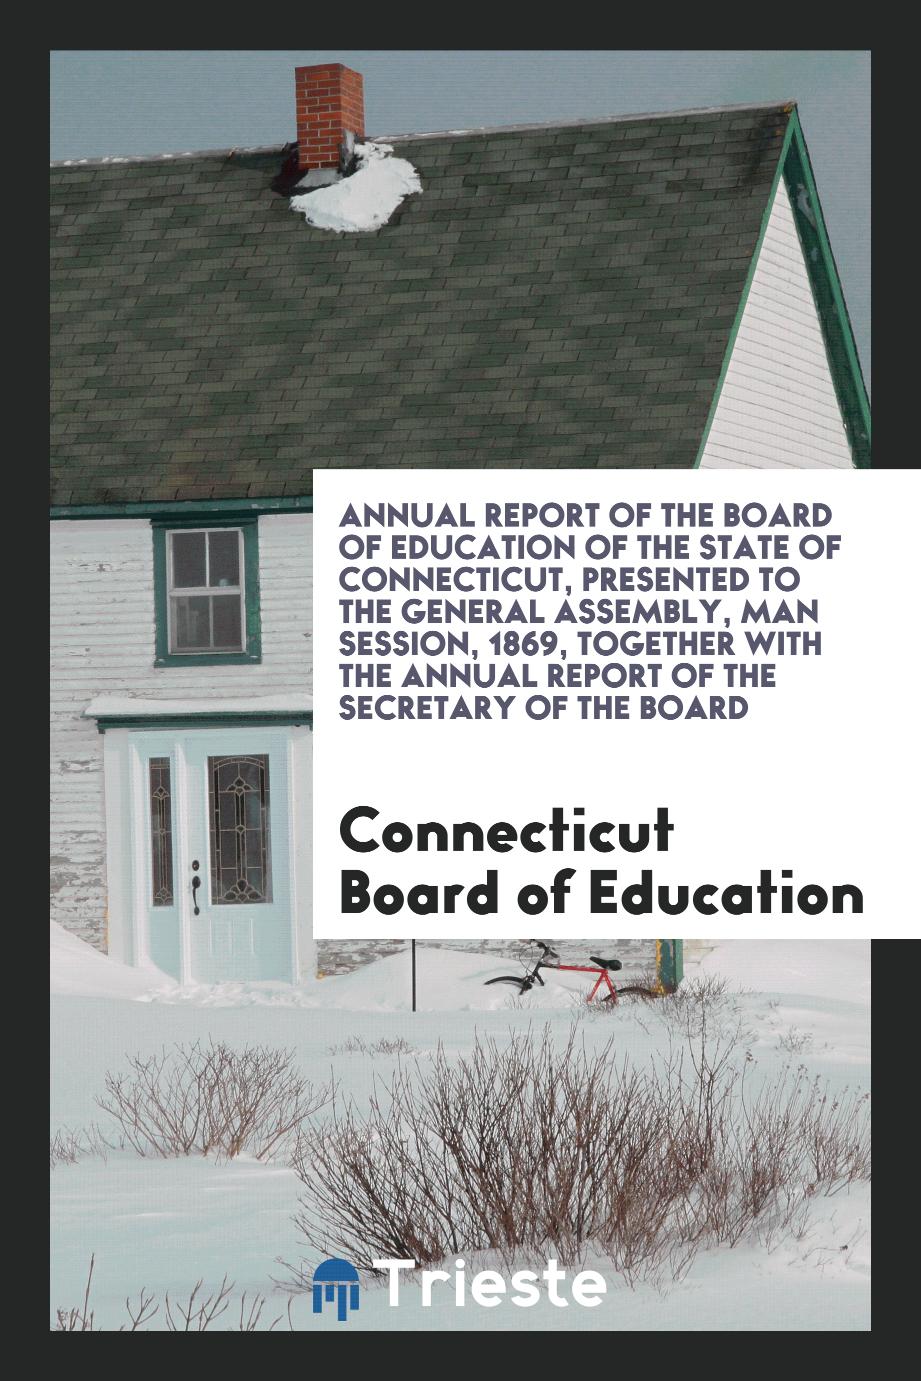 Annual Report of the Board of Education of the State of Connecticut, Presented to the General Assembly, Man Session, 1869, Together with the Annual Report of the Secretary of the Board